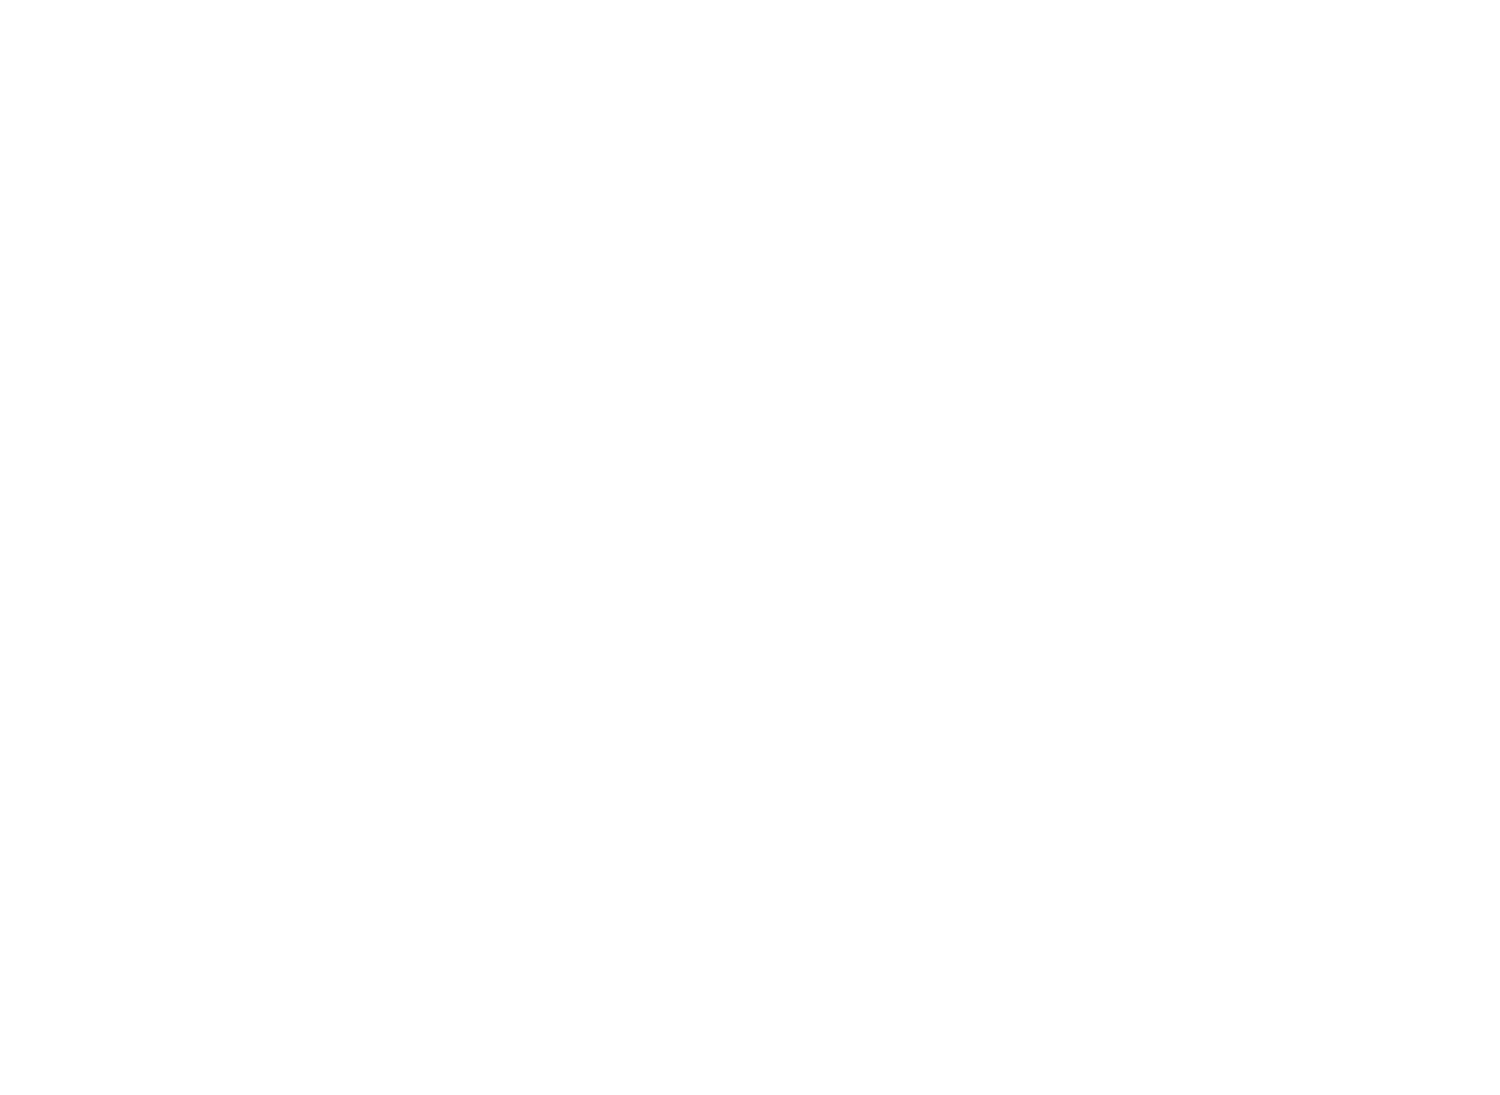 Mable